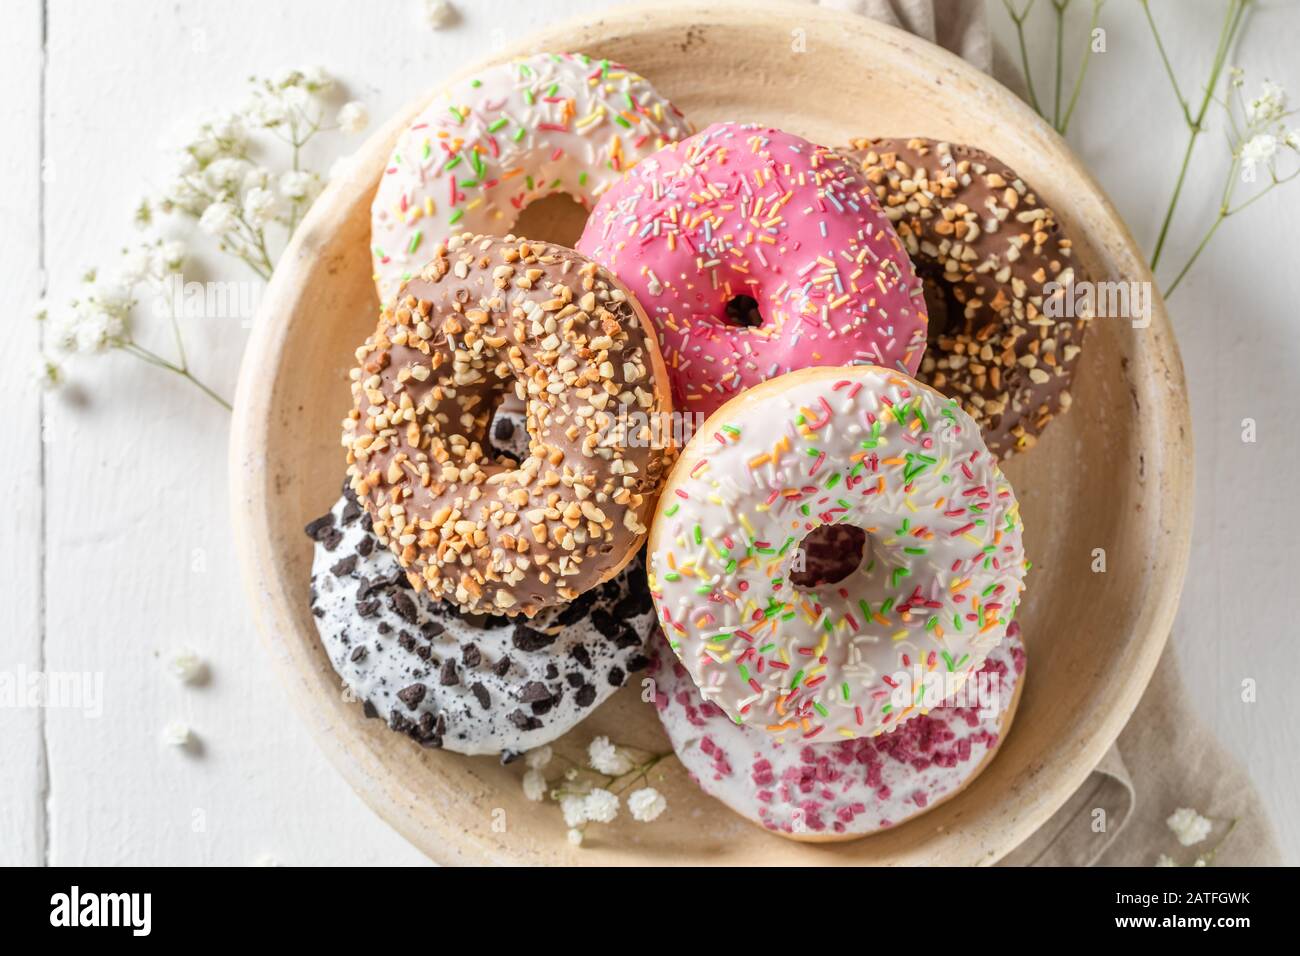 Homemade donuts with various decoration on white plate Stock Photo - Alamy